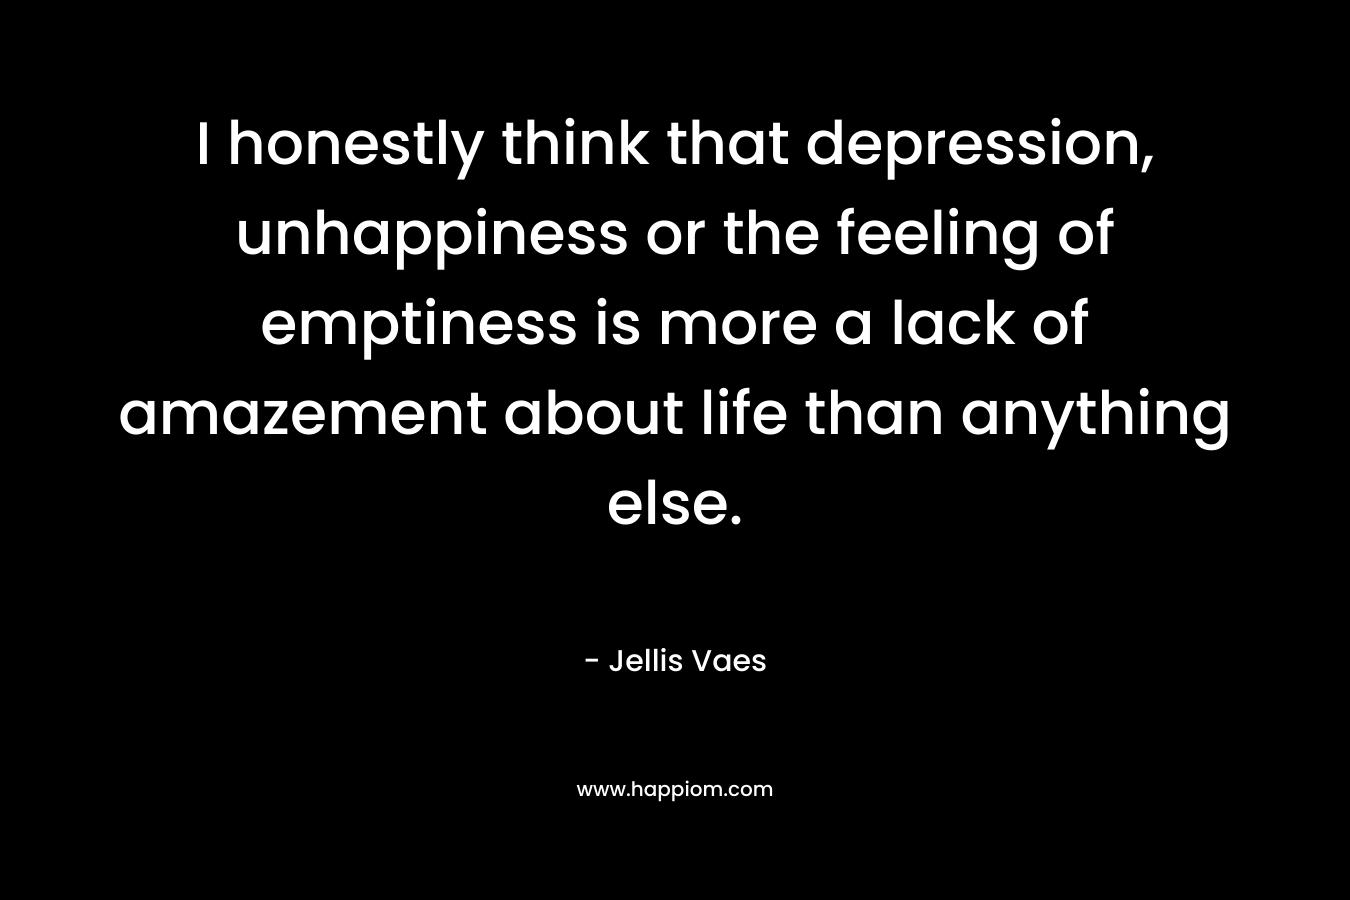 I honestly think that depression, unhappiness or the feeling of emptiness is more a lack of amazement about life than anything else. – Jellis Vaes